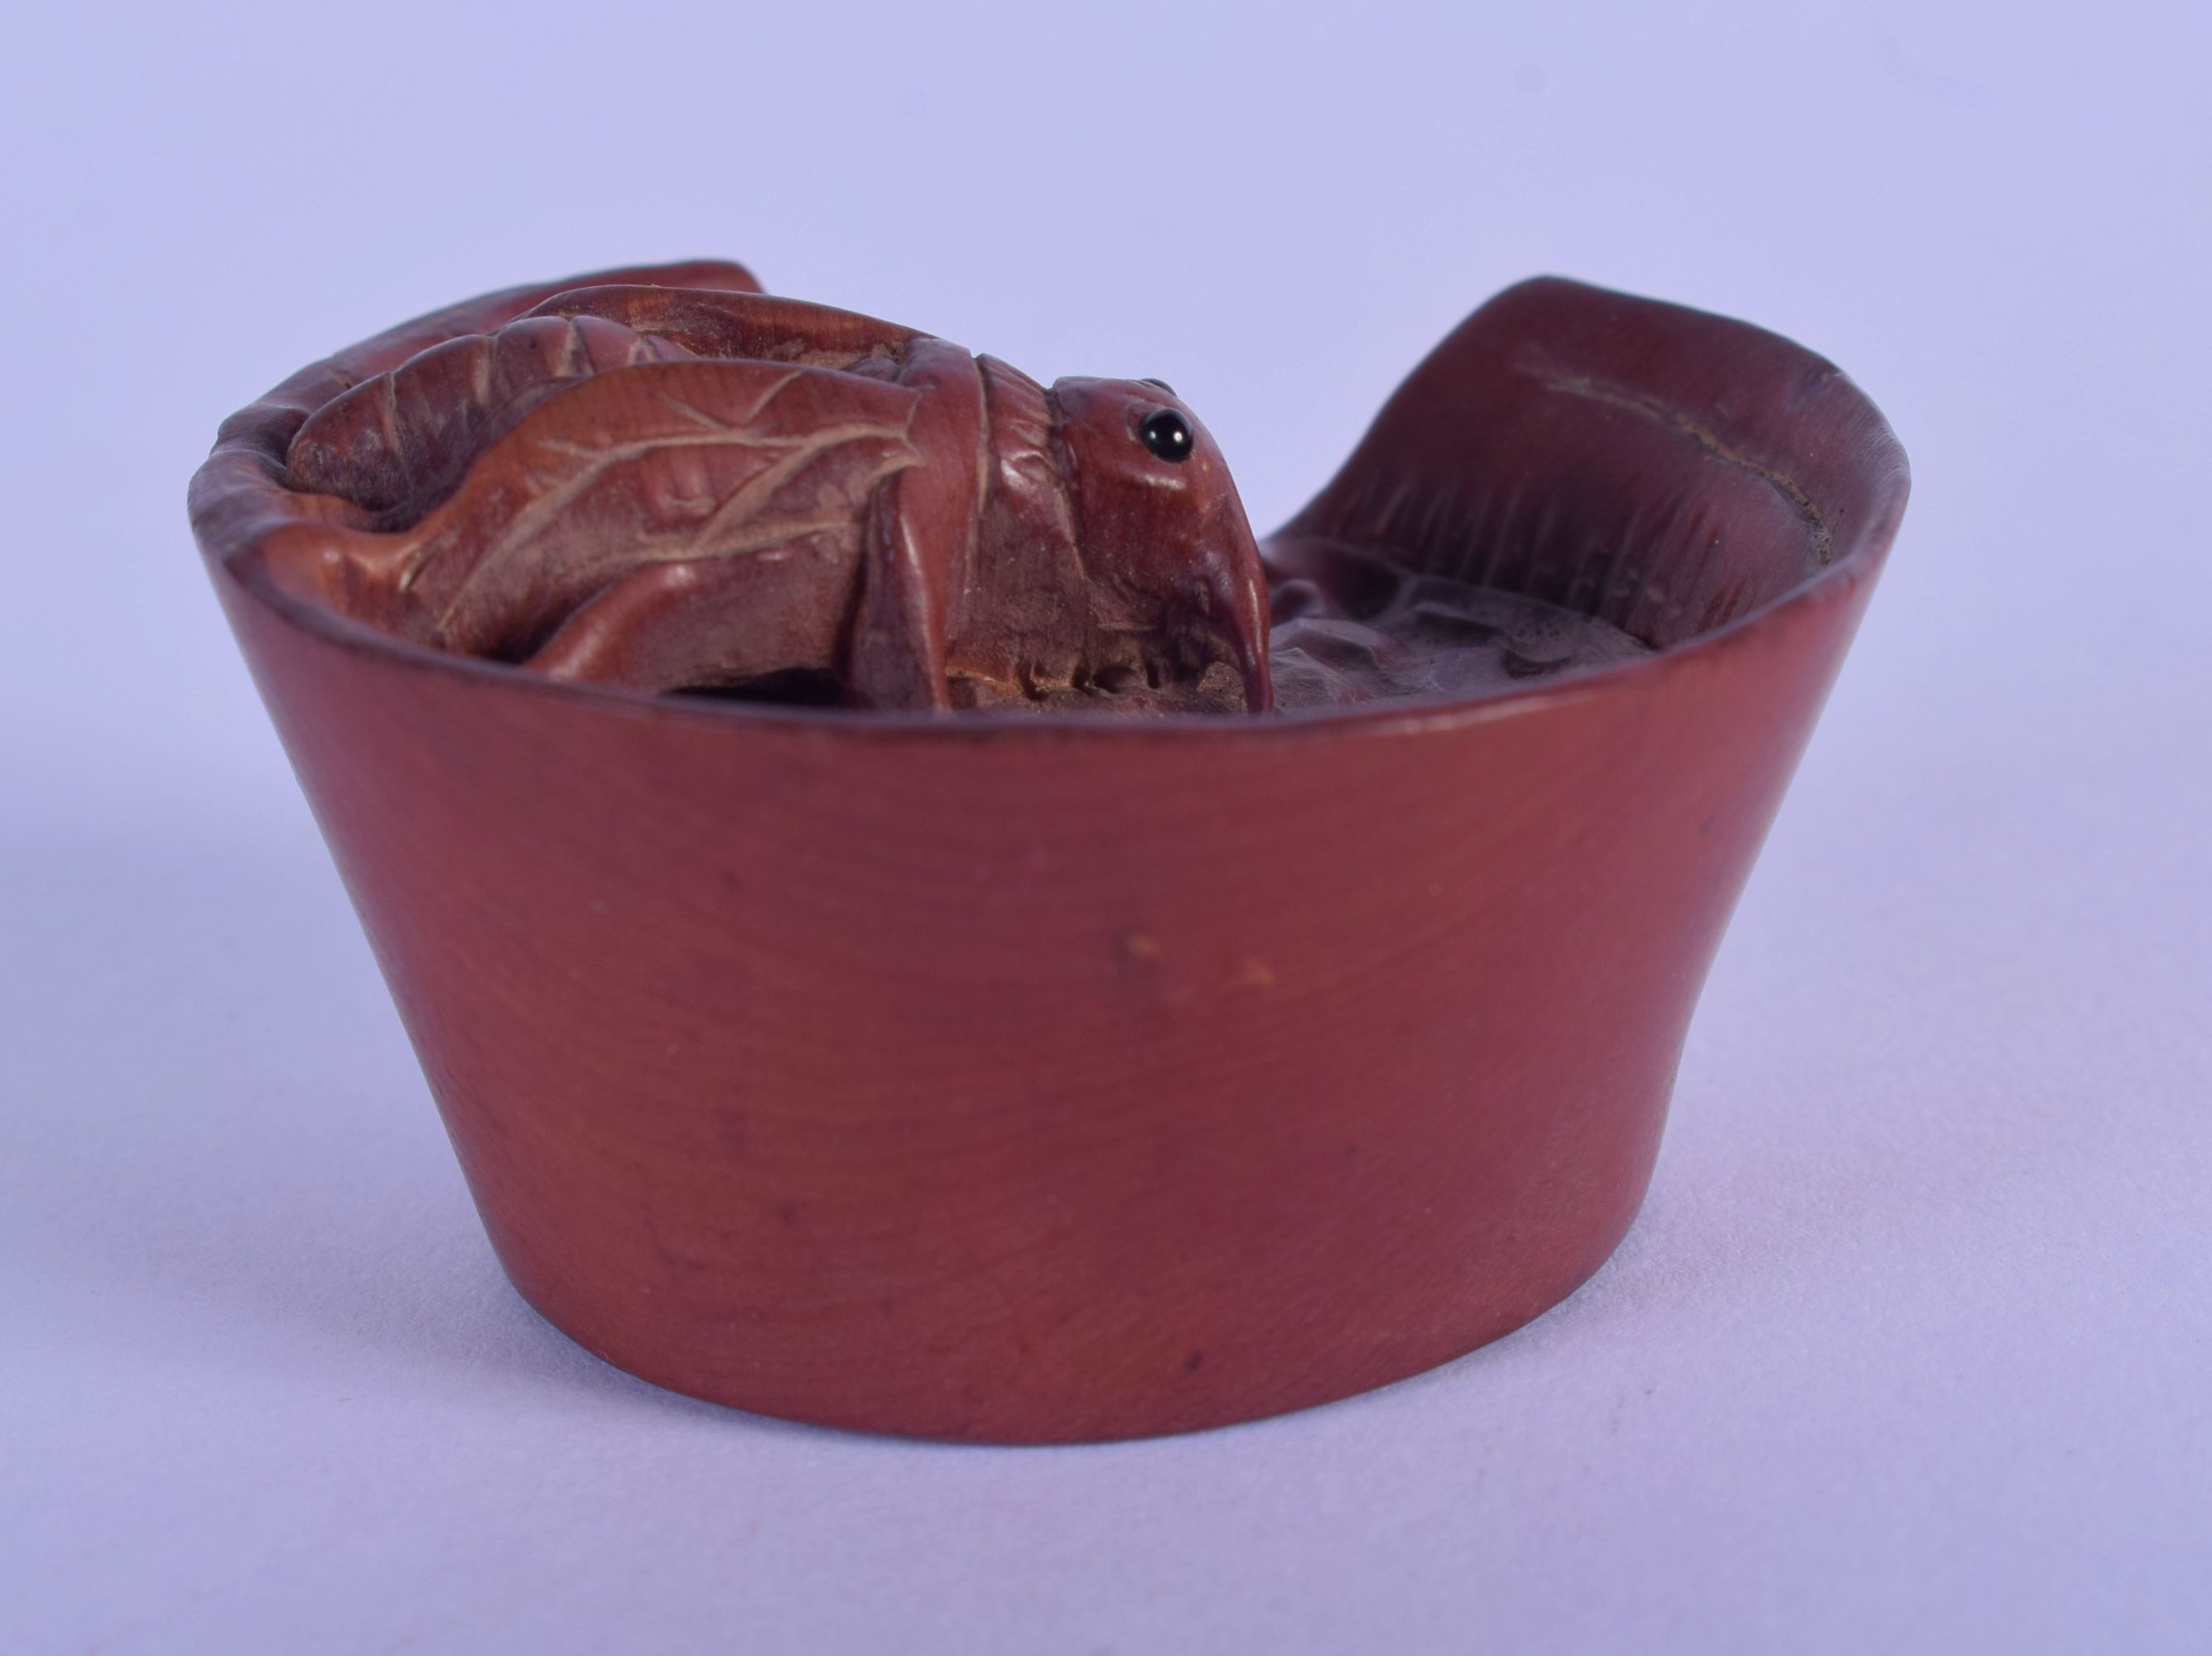 A JAPANESE BONE NETSUKE CARVED AS AN INSECT IN A BASKET. 4.7cm diameter, 2.5cm high, weight 21g - Image 2 of 4